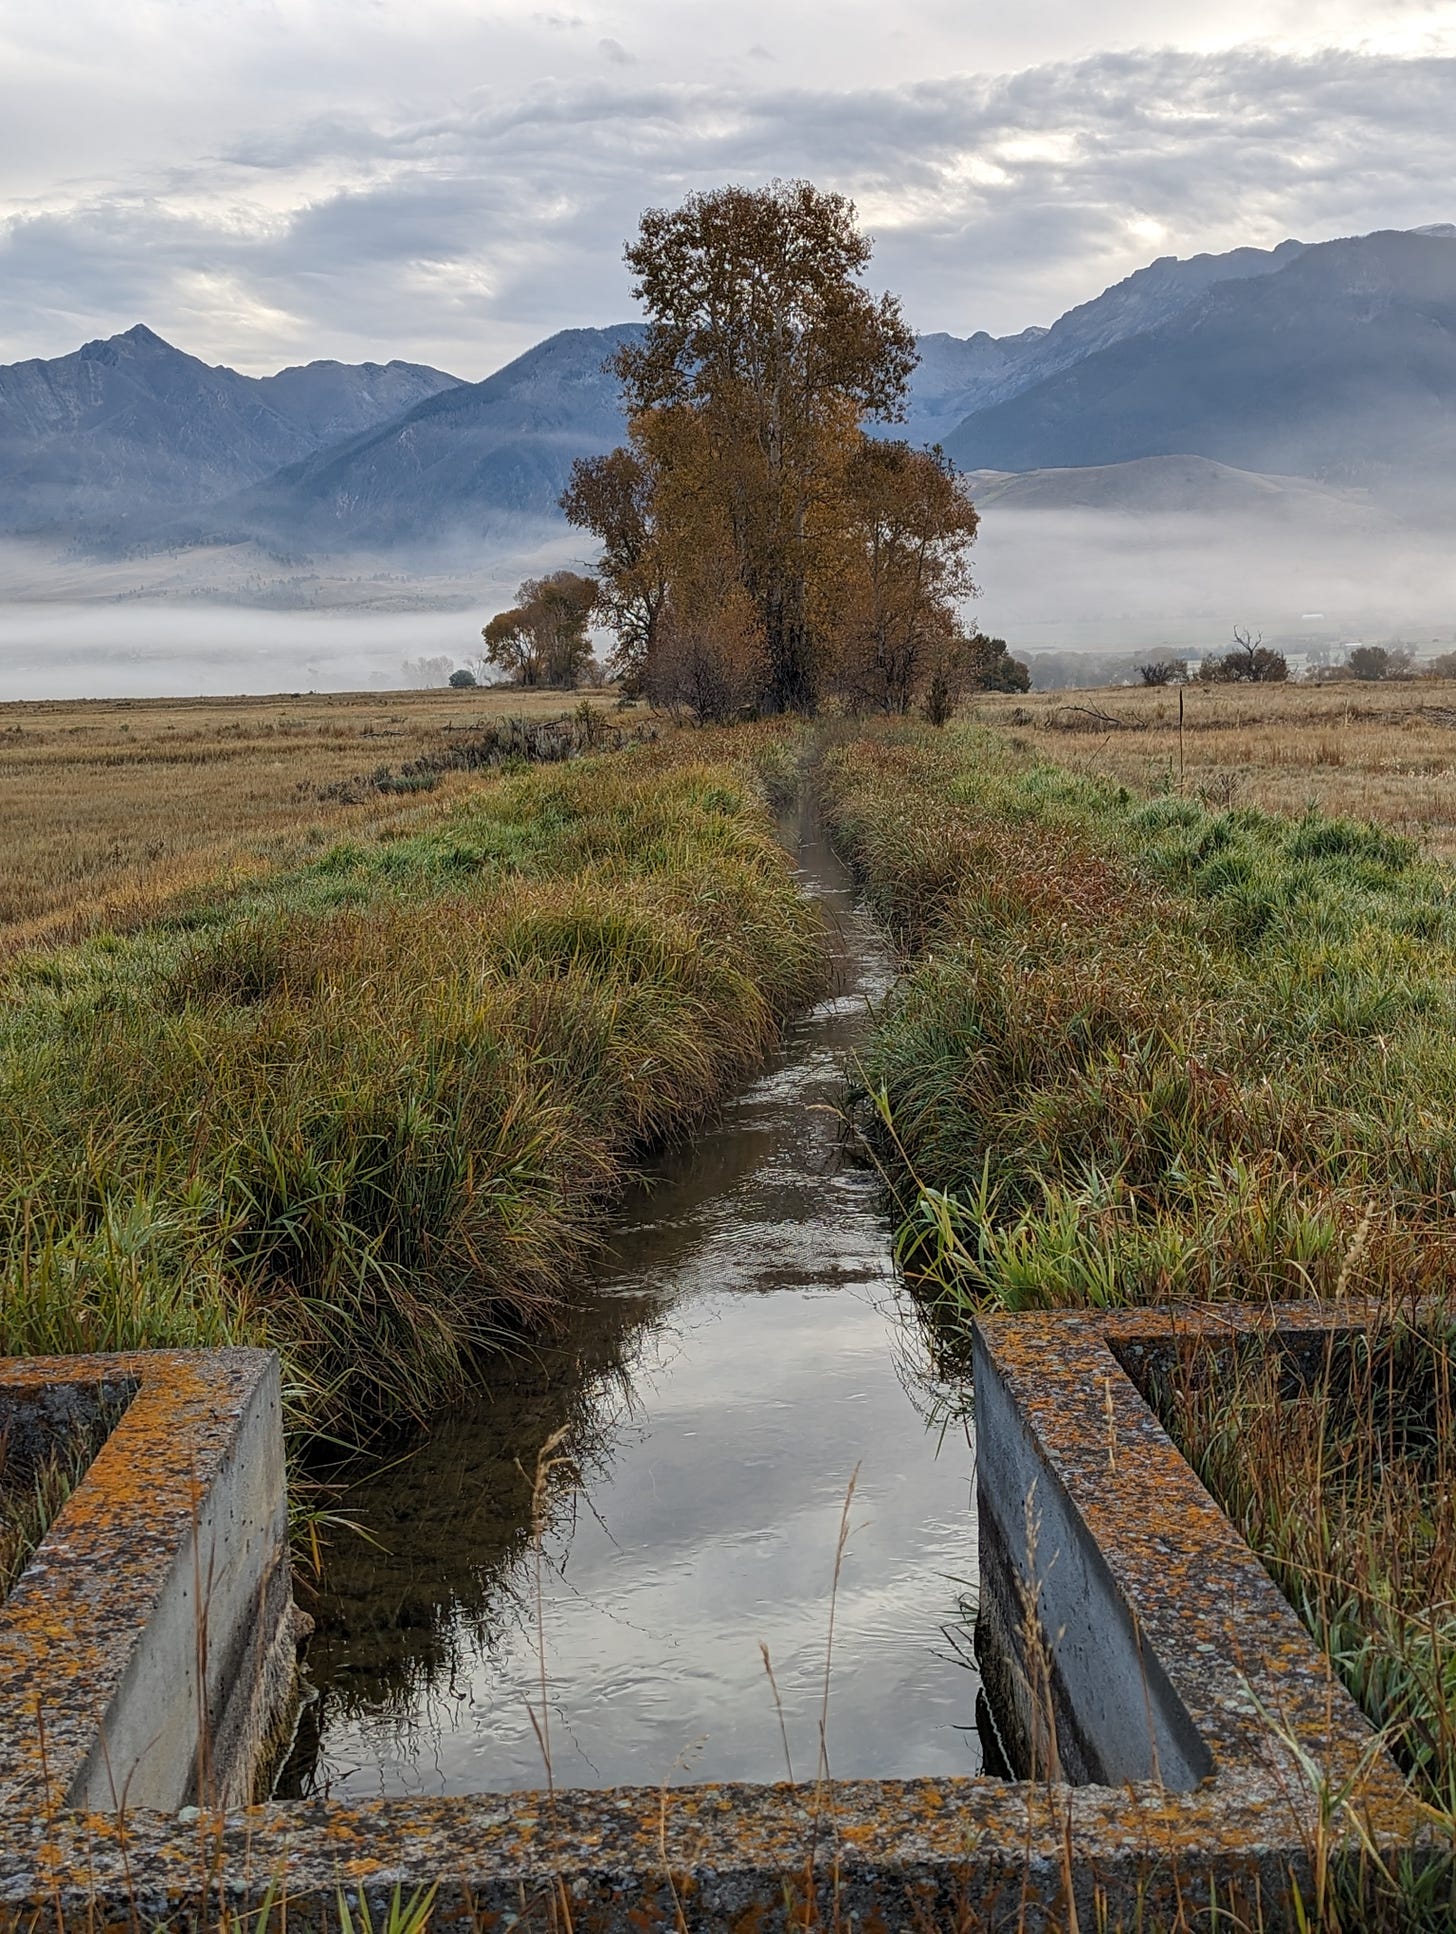 Irrigation ditch, cottonwoods mid distance, behind them a bank of mist, and the Absaroka front